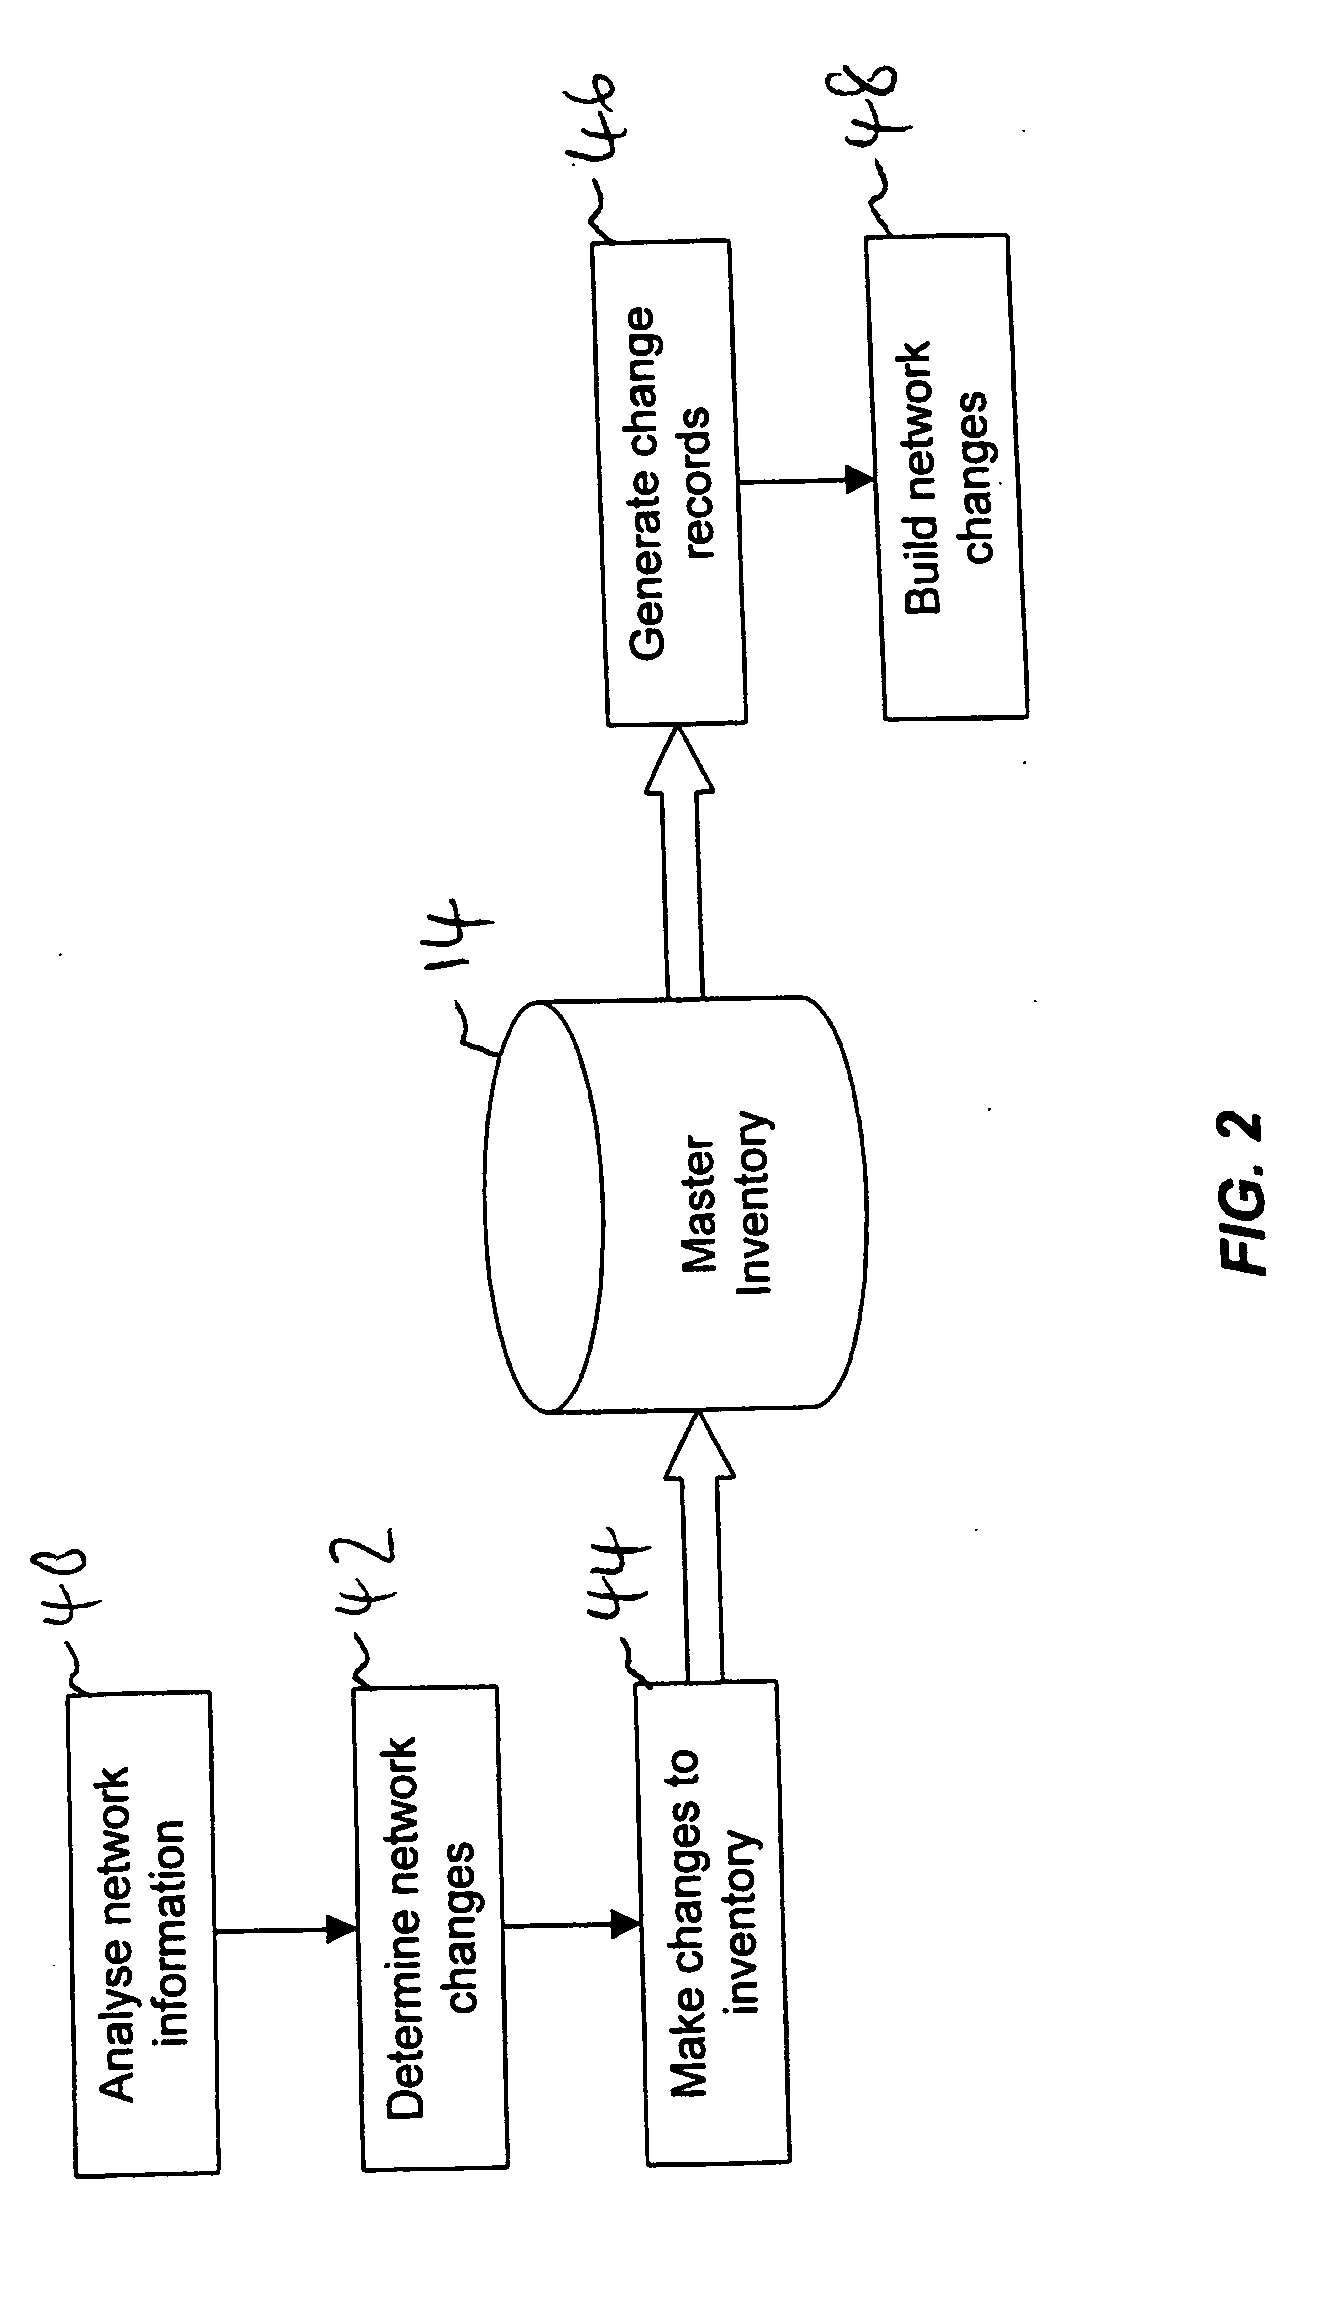 Method and system for network planning